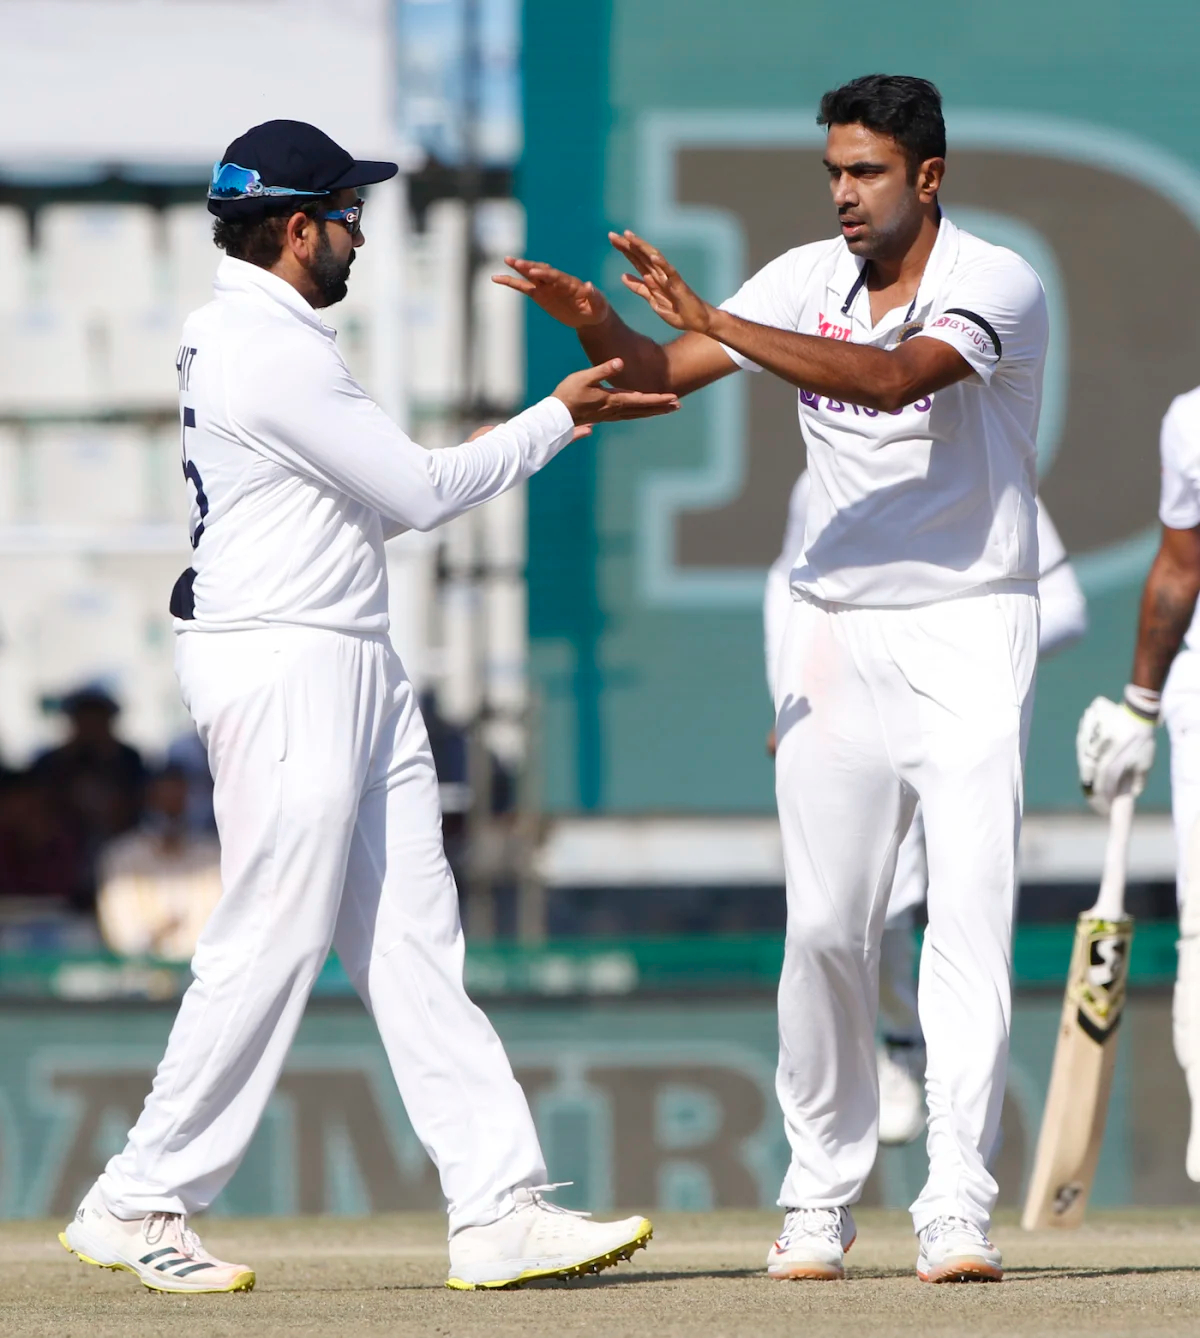 Ashwin now has second most Test wickets for India behind Anil Kumble's 619 Test wickets | BCCI